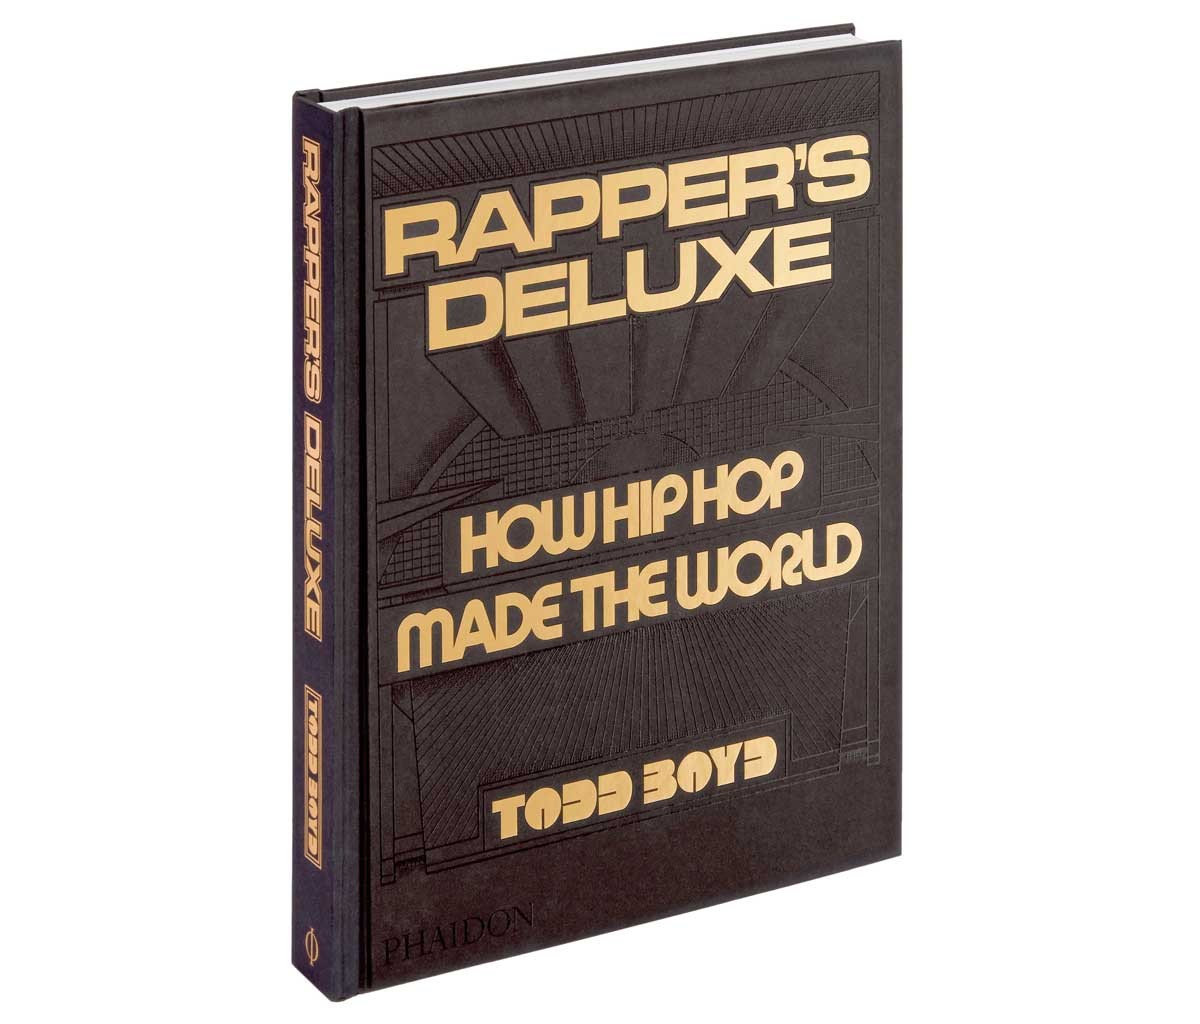 With his new coffee table book Rapper’s Deluxe: How Hip-Hop Made the World, Dr. Todd Boyd celebrates the evolution of the culture.